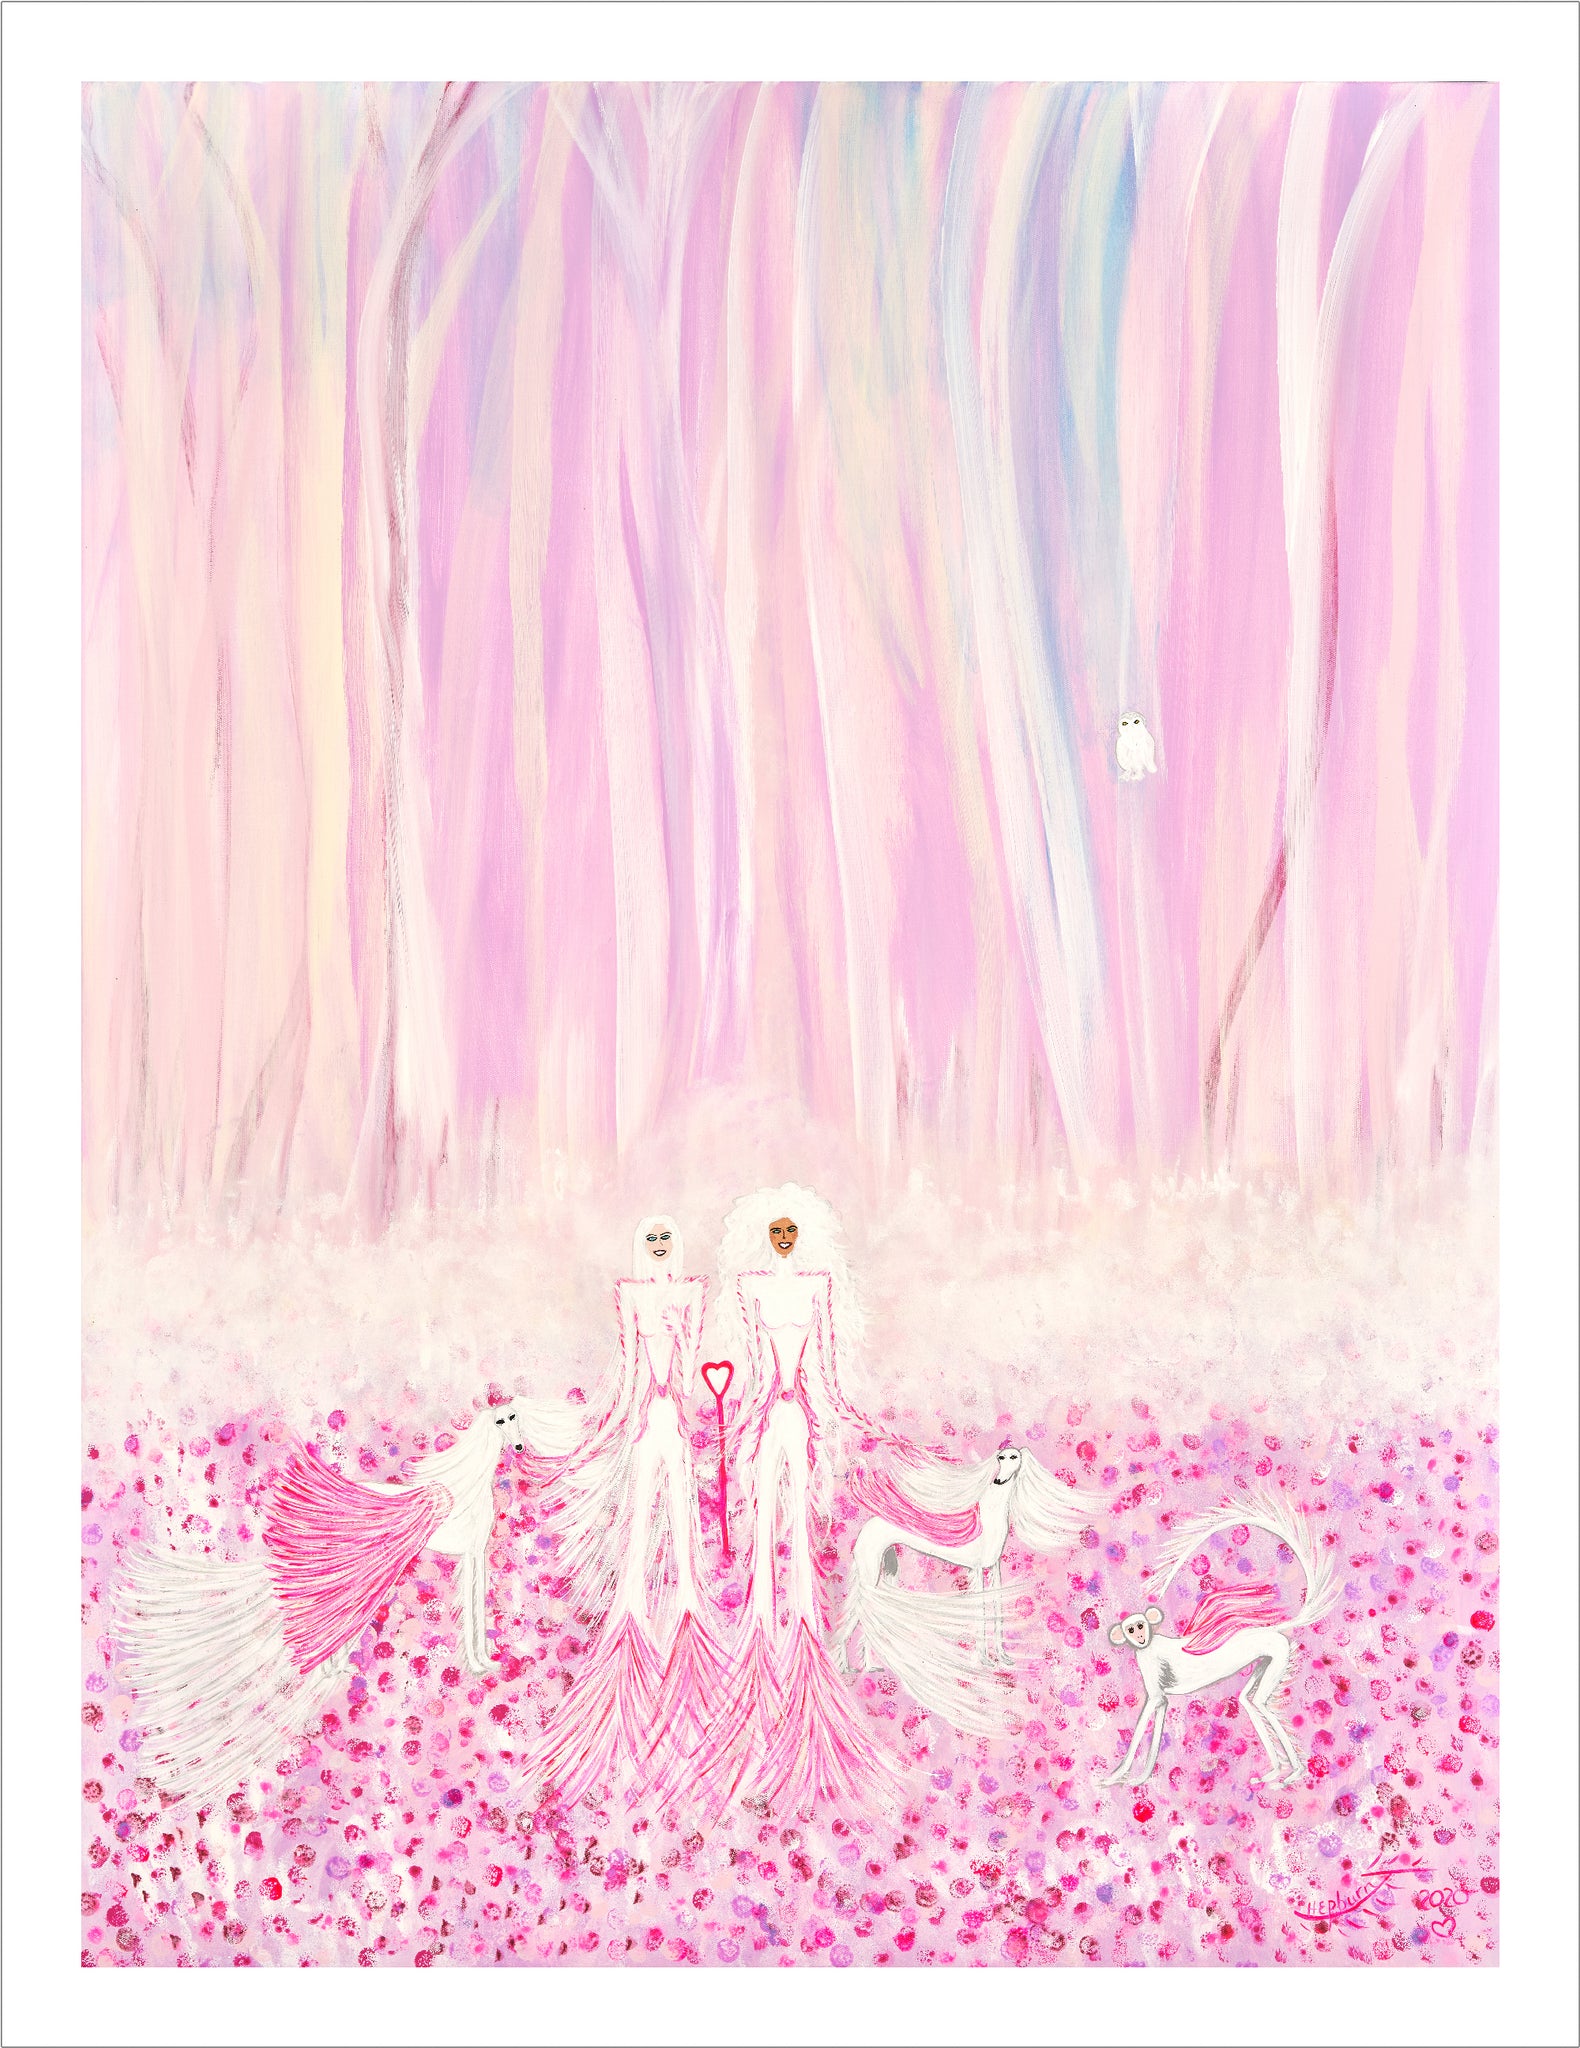 I Believe In Angels  - AP - Giclee 49.5 x 64.3 cm Open edition.